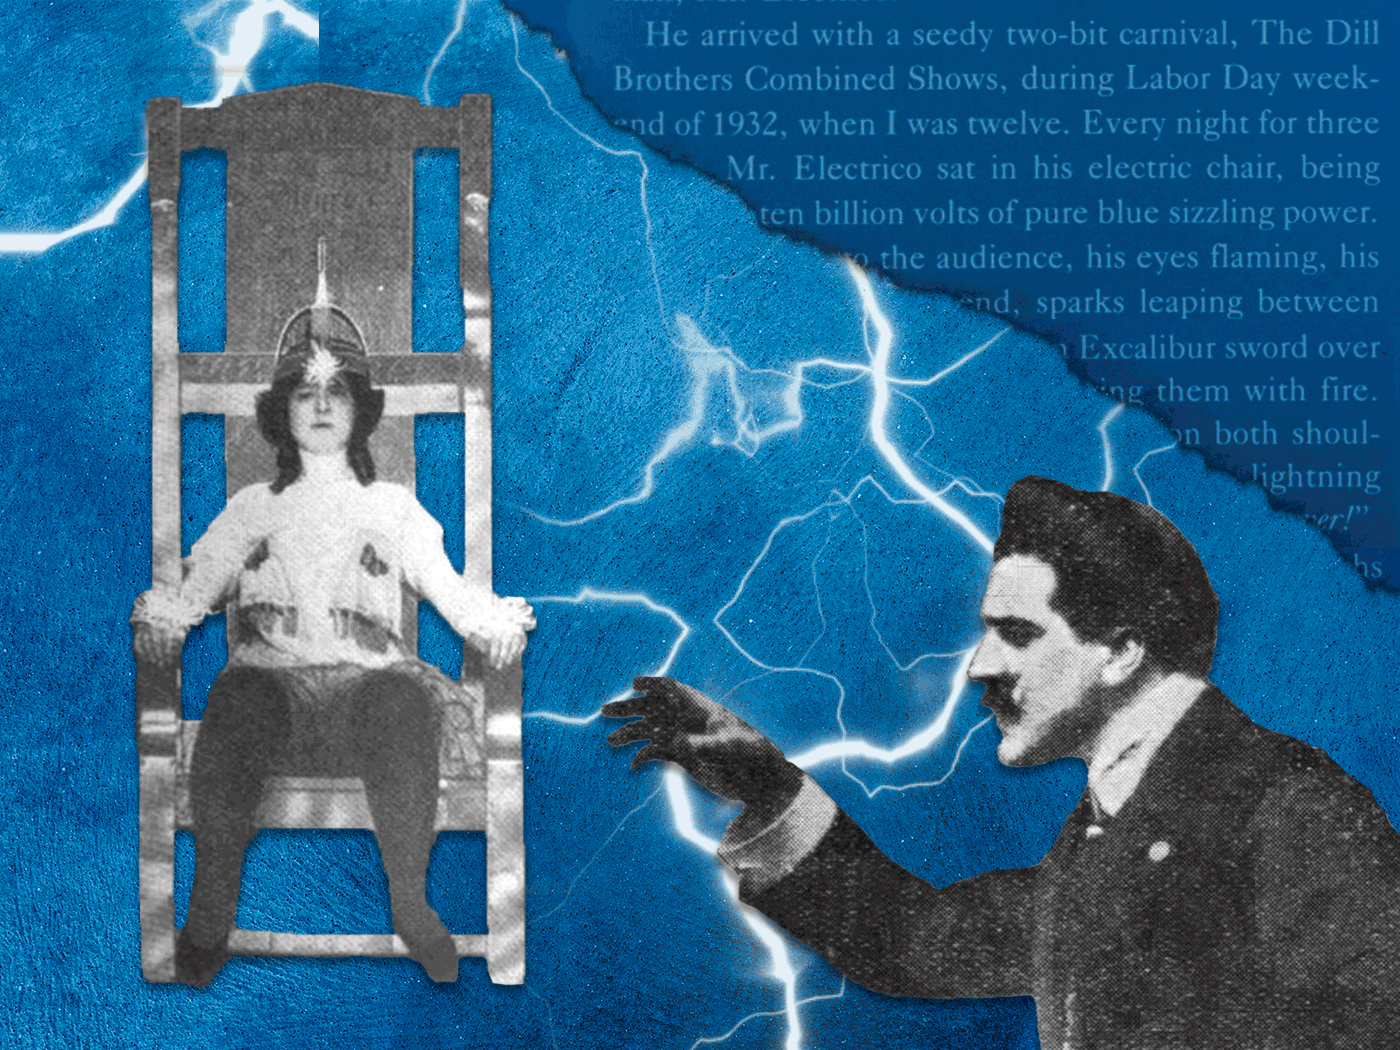 Gif illustration of Scottish magician Walford Bodie pointing at a sideshow performer in an electric chair